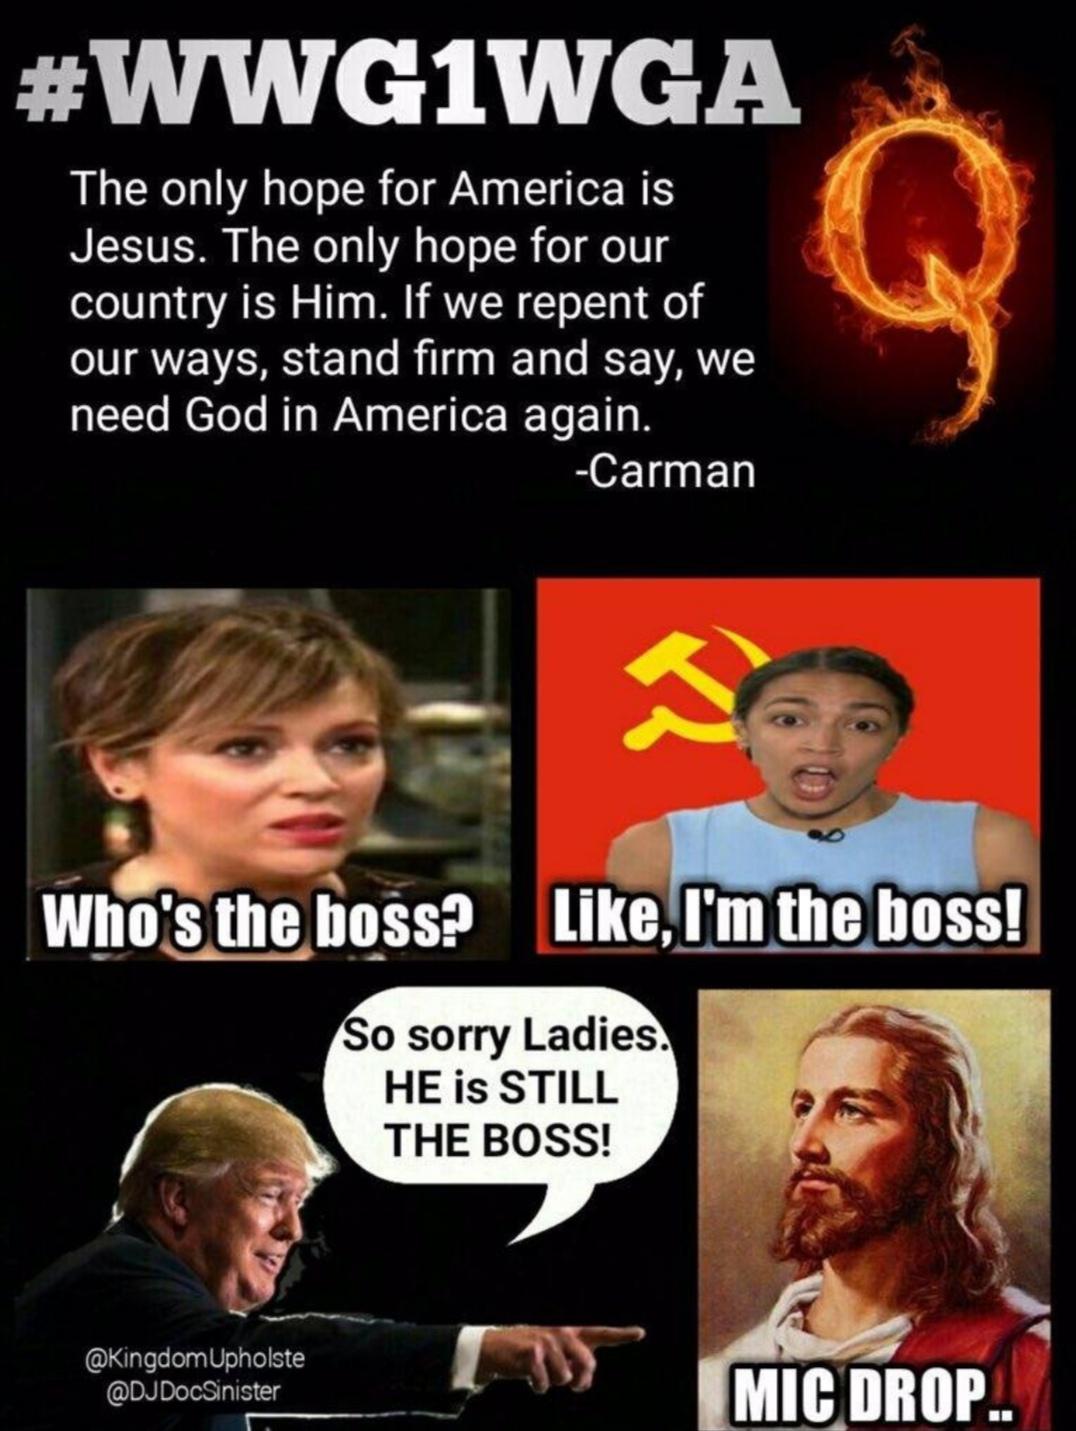 Cringe, Jesus, Middle East, Christians, Soos, Christianity cringe memes Cringe, Jesus, Middle East, Christians, Soos, Christianity text: #WWCIWCA The only hope for America is Jesus. The only hope for our country is Him. If we repent of our ways, stand firm and say, we need God in America again. -Carman Who'@gboss? Like, I'm the boss! So sorry Ladies. HE is STILL THE BOSS! @KingdomUpholste @DJDocSinister MIC DROP.. 